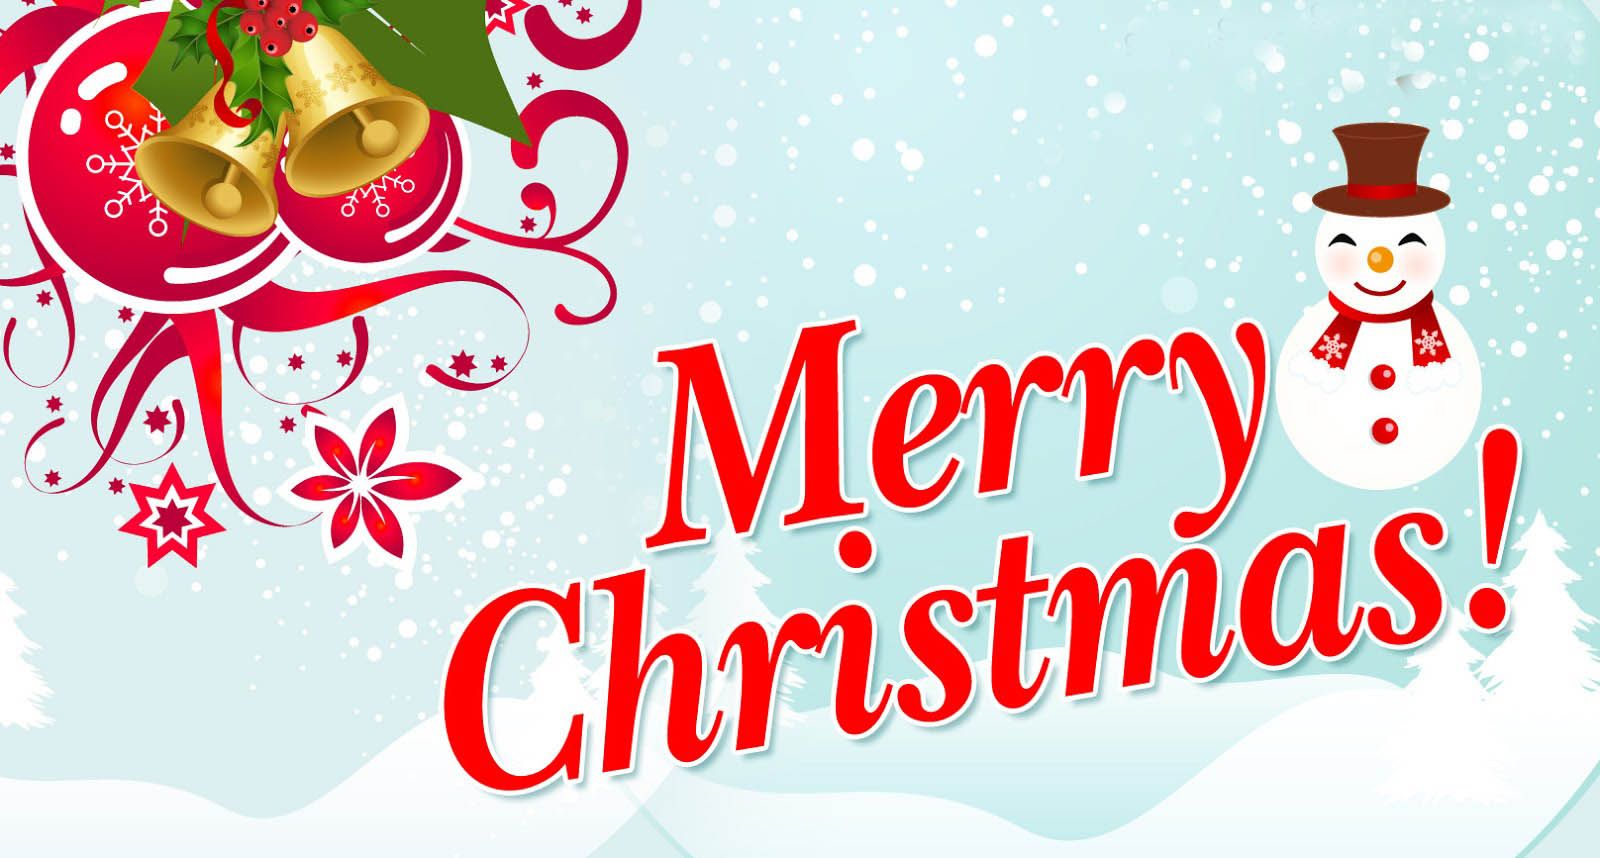 Best Merry Christmas Sayings And XMAS Wishes for Loved Ones